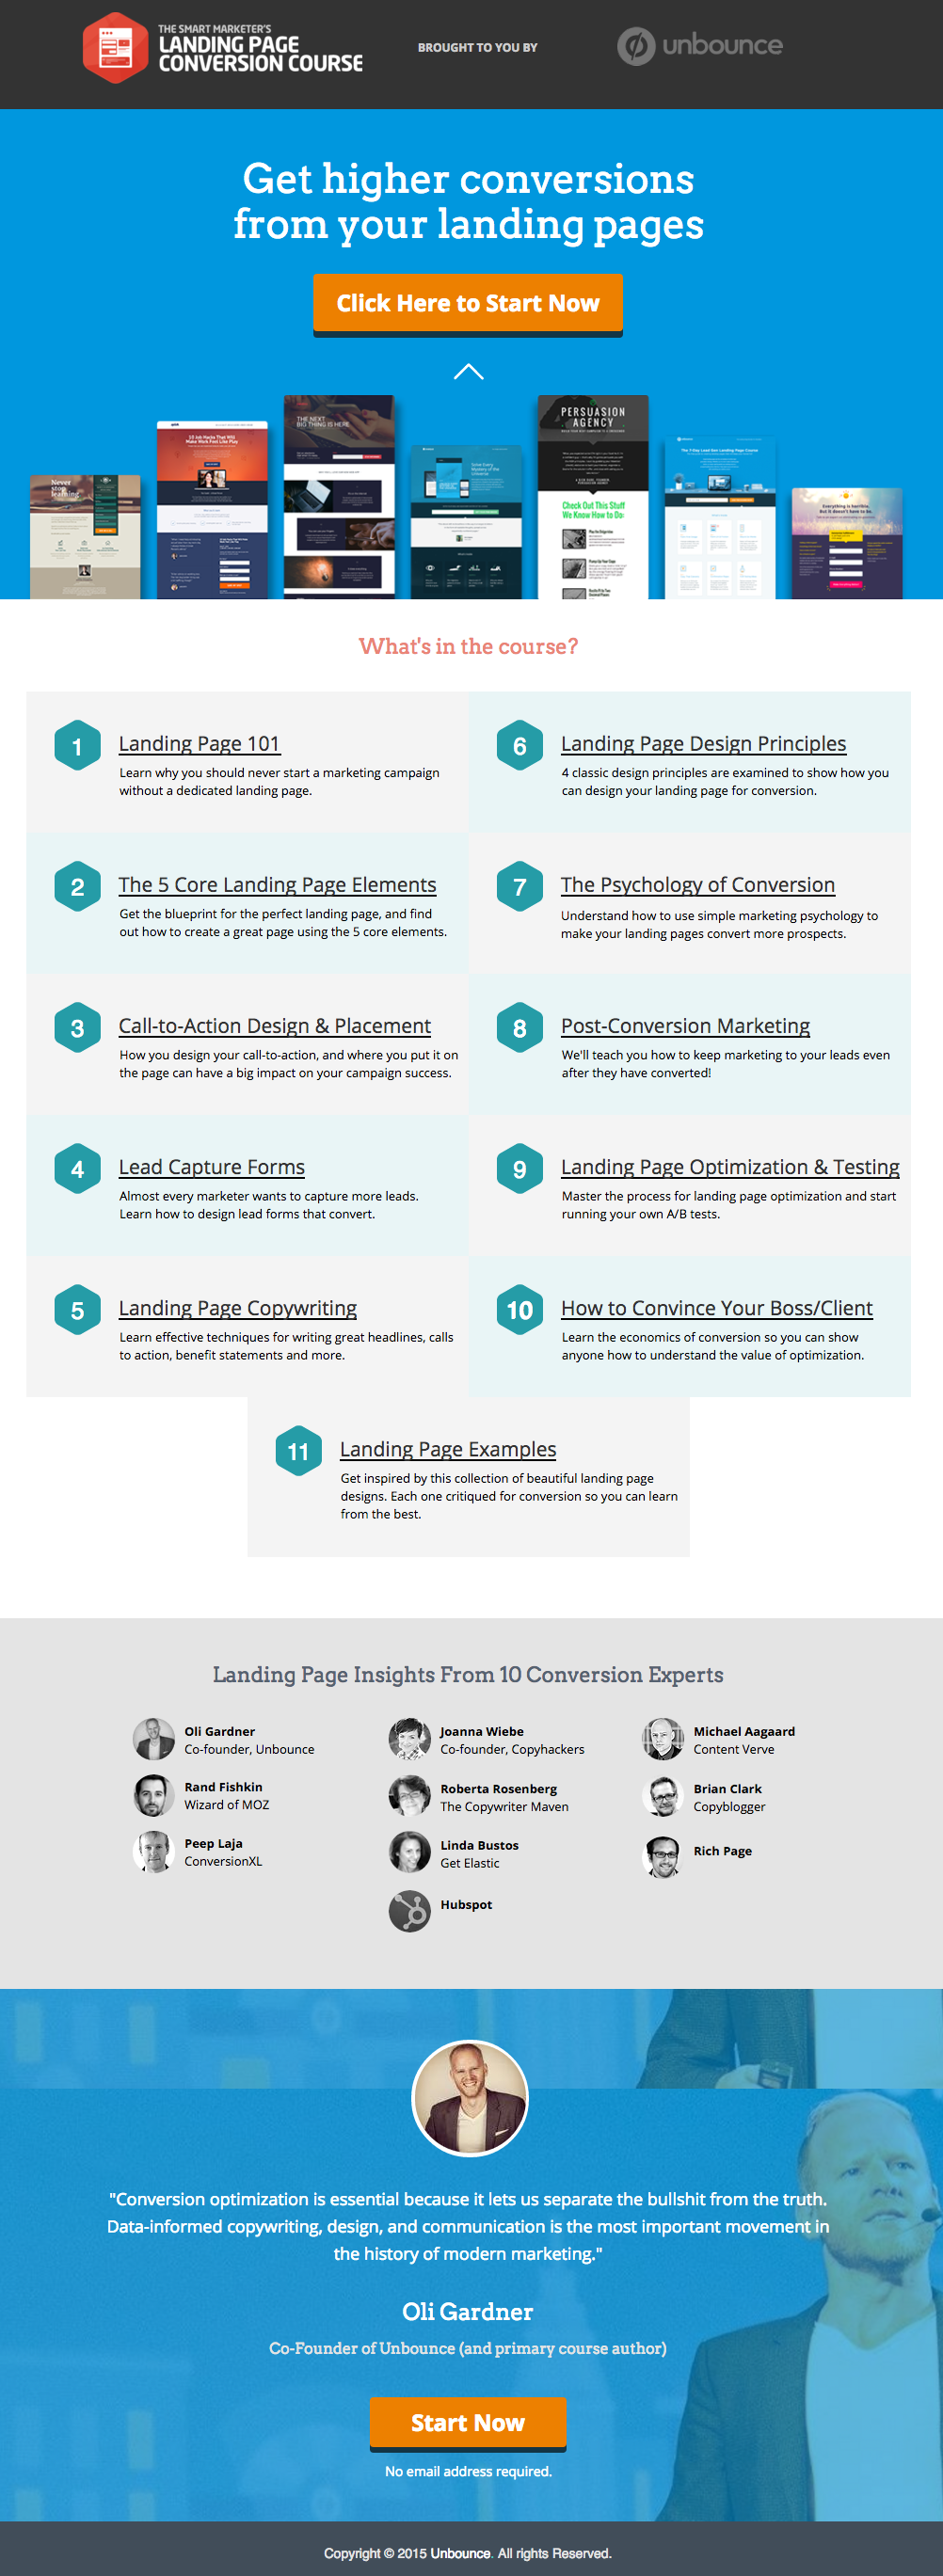 unbounce-landing-page-example.png